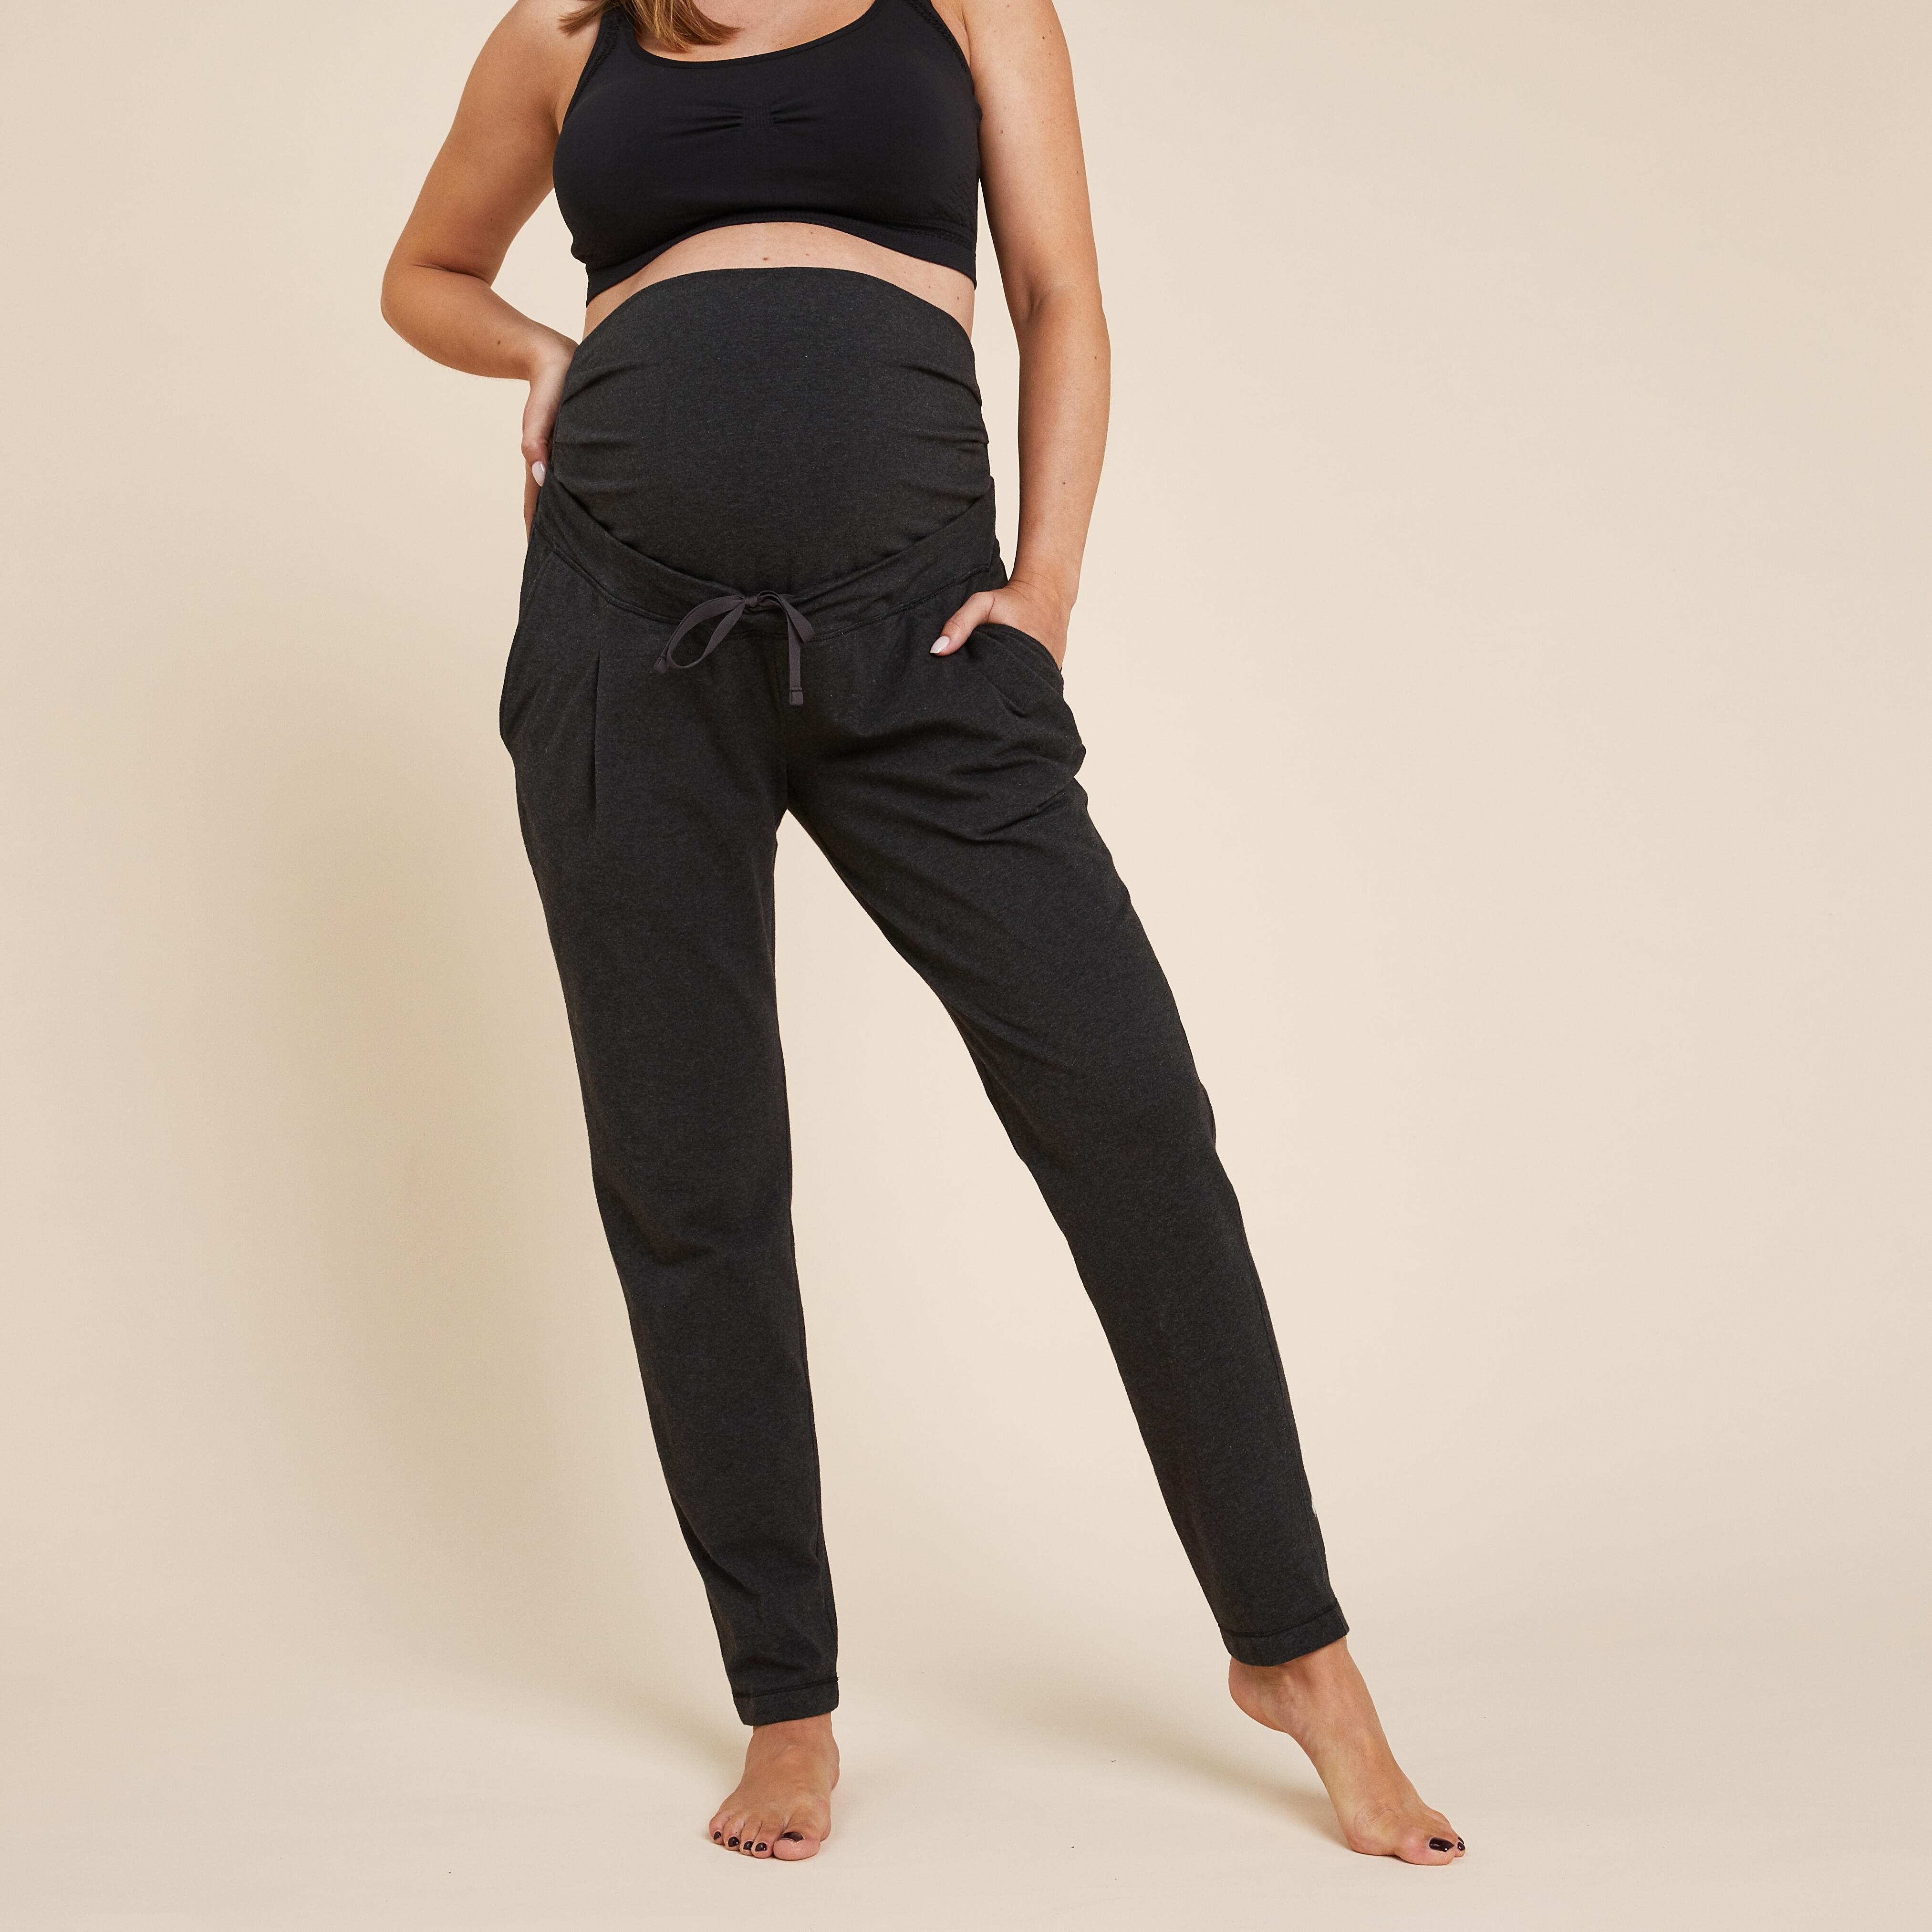 Pregnancy Pants Tracksuits Lounge Track  Buy Pregnancy Pants Tracksuits  Lounge Track online in India